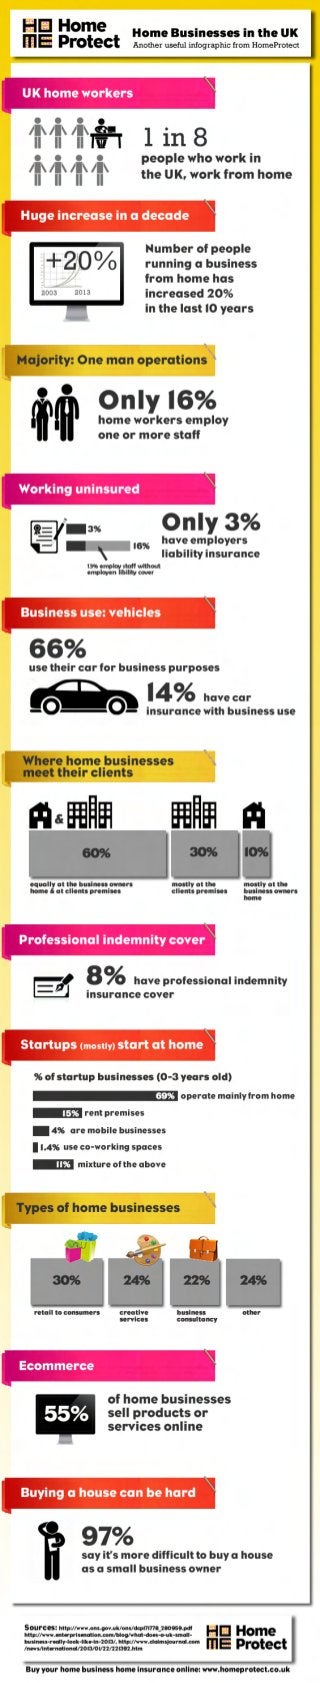 creative services
24%
Home Businesses in the UK
Another useful infographic from HomeProtect
3%
mostly at the 
clients premises
equally at the business owners 
home  at clients premises
60%
16%
30%
Buy your home business home insurance online: www.homeprotect.co.uk
S o u r c e s : http://www.ons.gov.uk/ons/dcp171778_280959.pdf 
http://www.enterprisenation.com/blog/what-does-a-uk-small-
business-really-look-like-in-2013/, http://www.claimsjournal.com
/news/international/2013/01/22/221392.htm
UK home workers
1 i n 8 
people who work in 
the UK, work from home
Number of people 
running a business 
from home has 
increased 20% 
in the last 10 years
+20%
2003 2013
Huge increase in a decade
O n l y 1 6 % 
home workers employ 
one or more staff
Majority: One man operations
Working uninsured
O n l y 3 % 
have employers 
liability insurance
3%
Business use: vehicles
6 6 % 
use their car for business purposes
1 4 % have car 
insurance with business use
Where home businesses 
meet their clients
10%

mostly at the 
business owners 
home
Professional indemnity cover
8 % have professional indemnity
insurance cover
Startups (mostly) start at home
4%
15%
69%
1.4%
11%
% of startup businesses (0-3 years old)
operate mainly from home
rent premises
are mobile businesses
use co-working spaces
mixture of the above
Types of home businesses
creative 
services
retail to consumers
30% 24%
otherbusiness 
consultancy
24%22%
Ecommerce
55%
of home businesses
sell products or
services online
Buying a house can be hard
9 7 % 
say it’s more difficult to buy a house
as a small business owner
13% employ staff without
employers libility cover
 